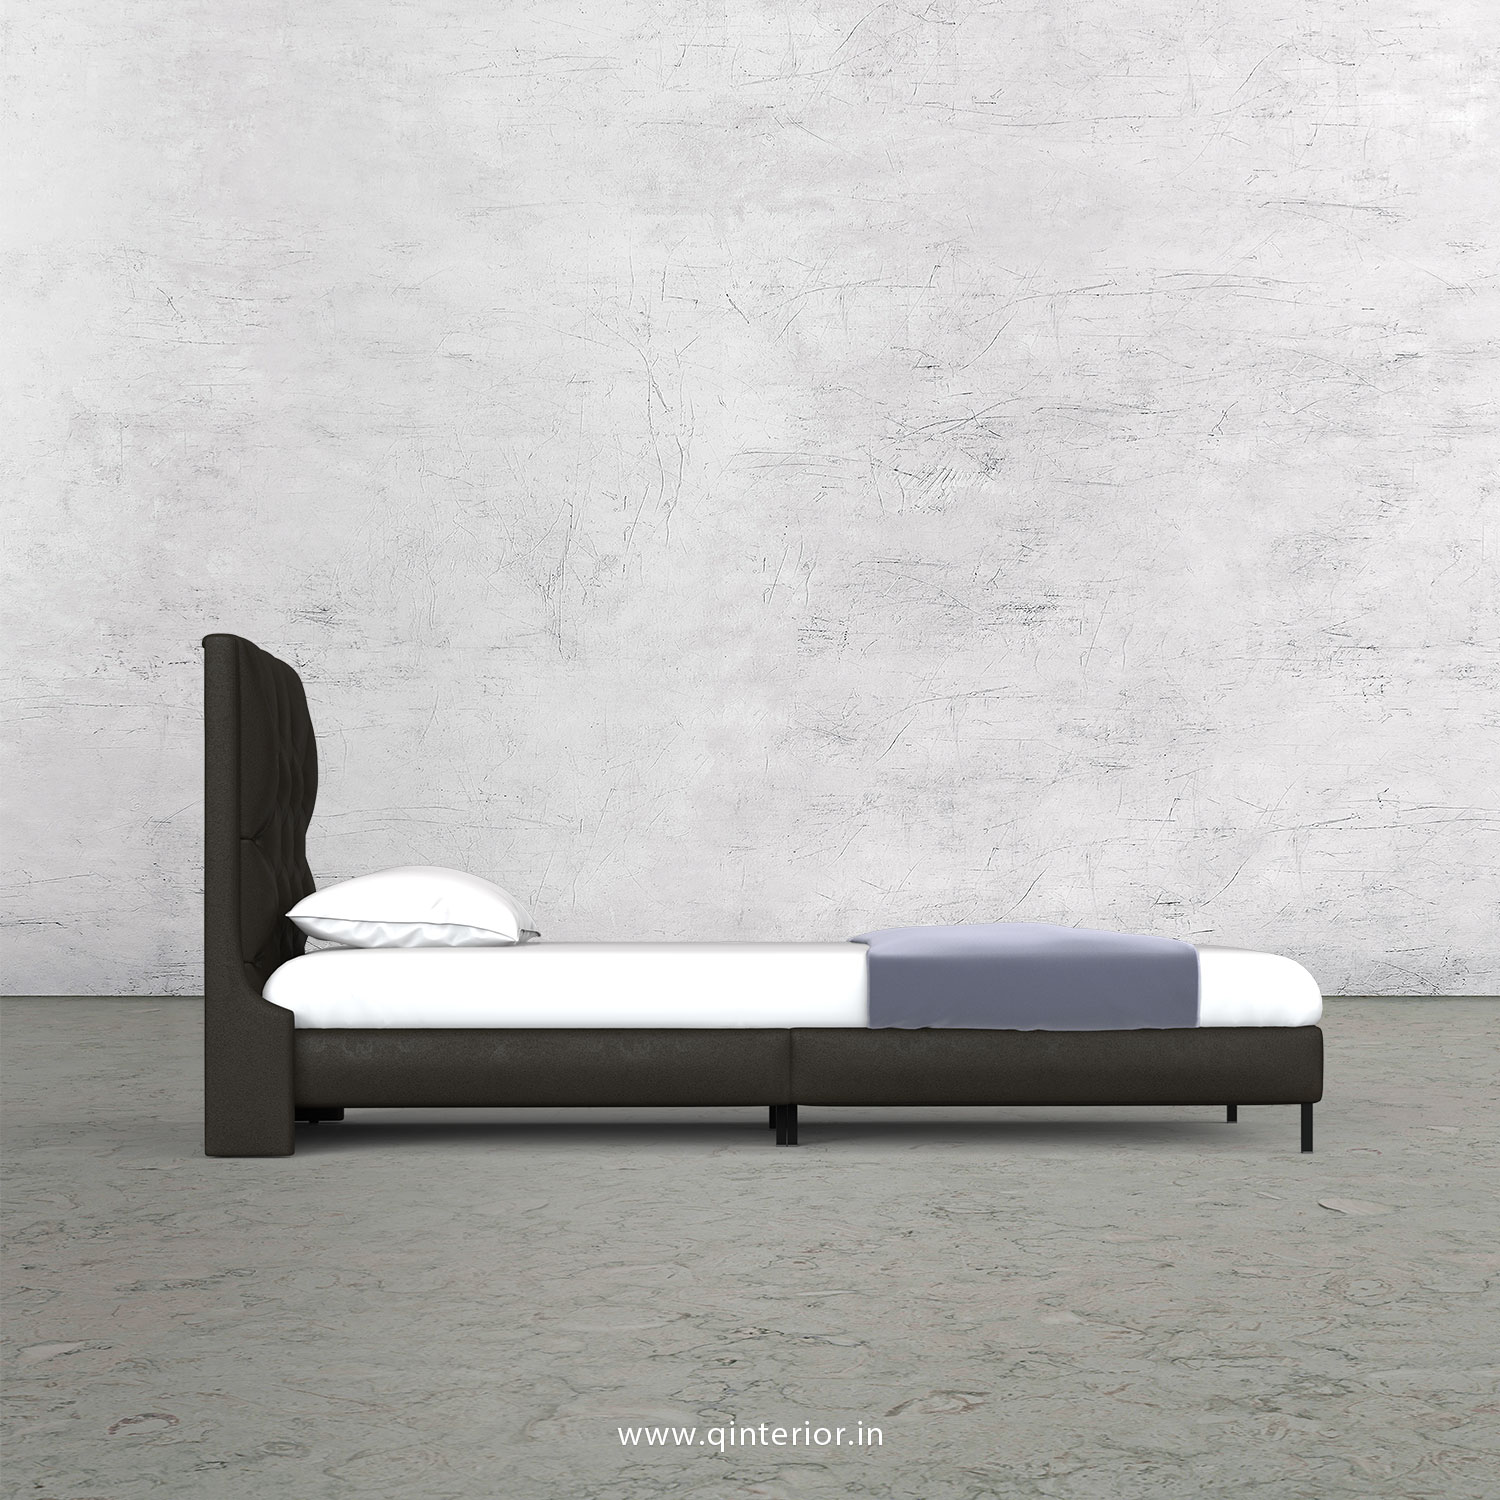 Scorpius Single Bed in Fab Leather – SBD003 FL11